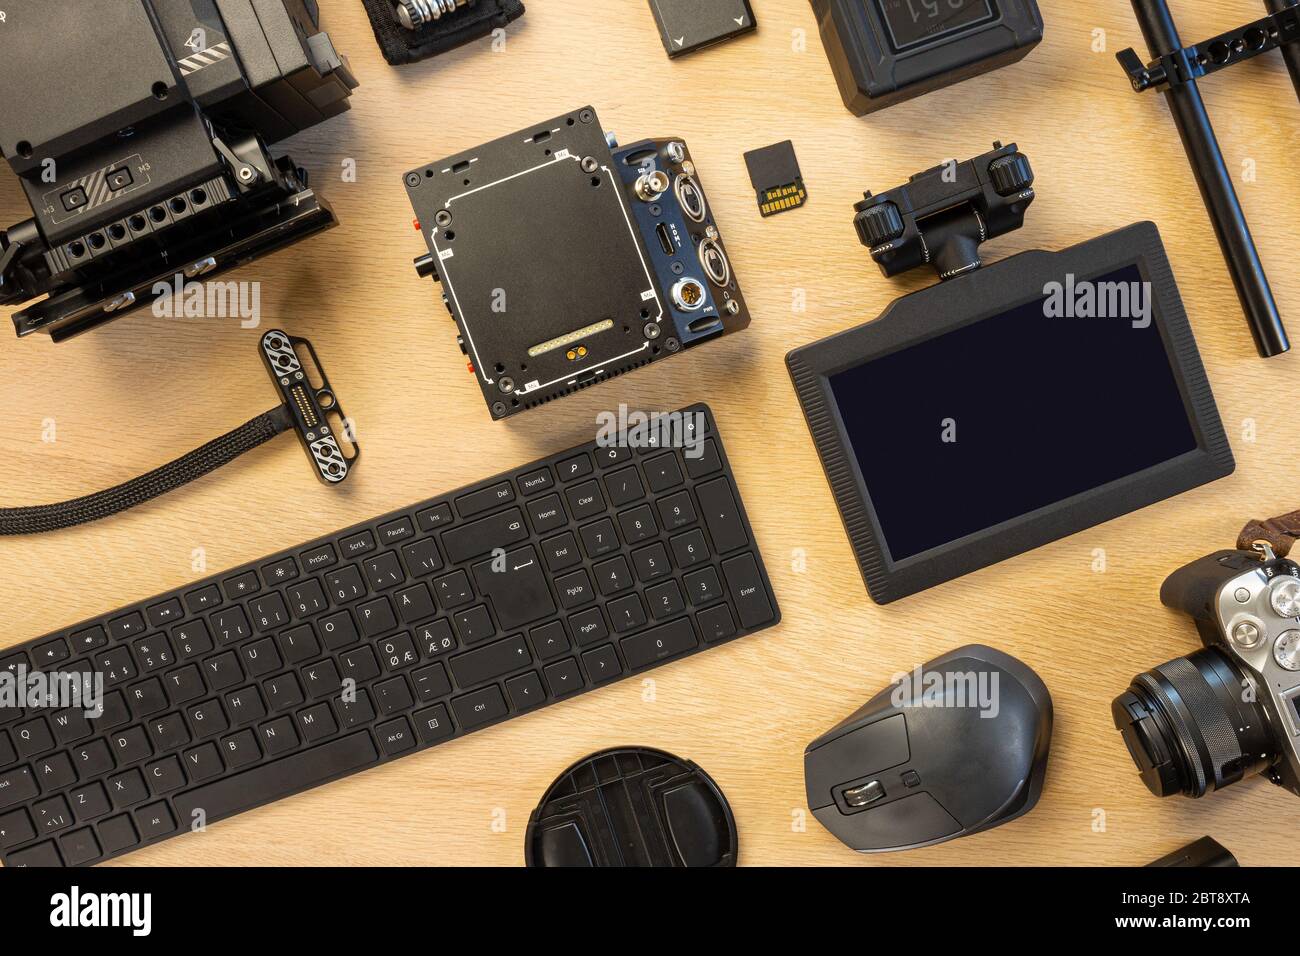 Overhead view of computer parts and filming accessories on table Stock Photo